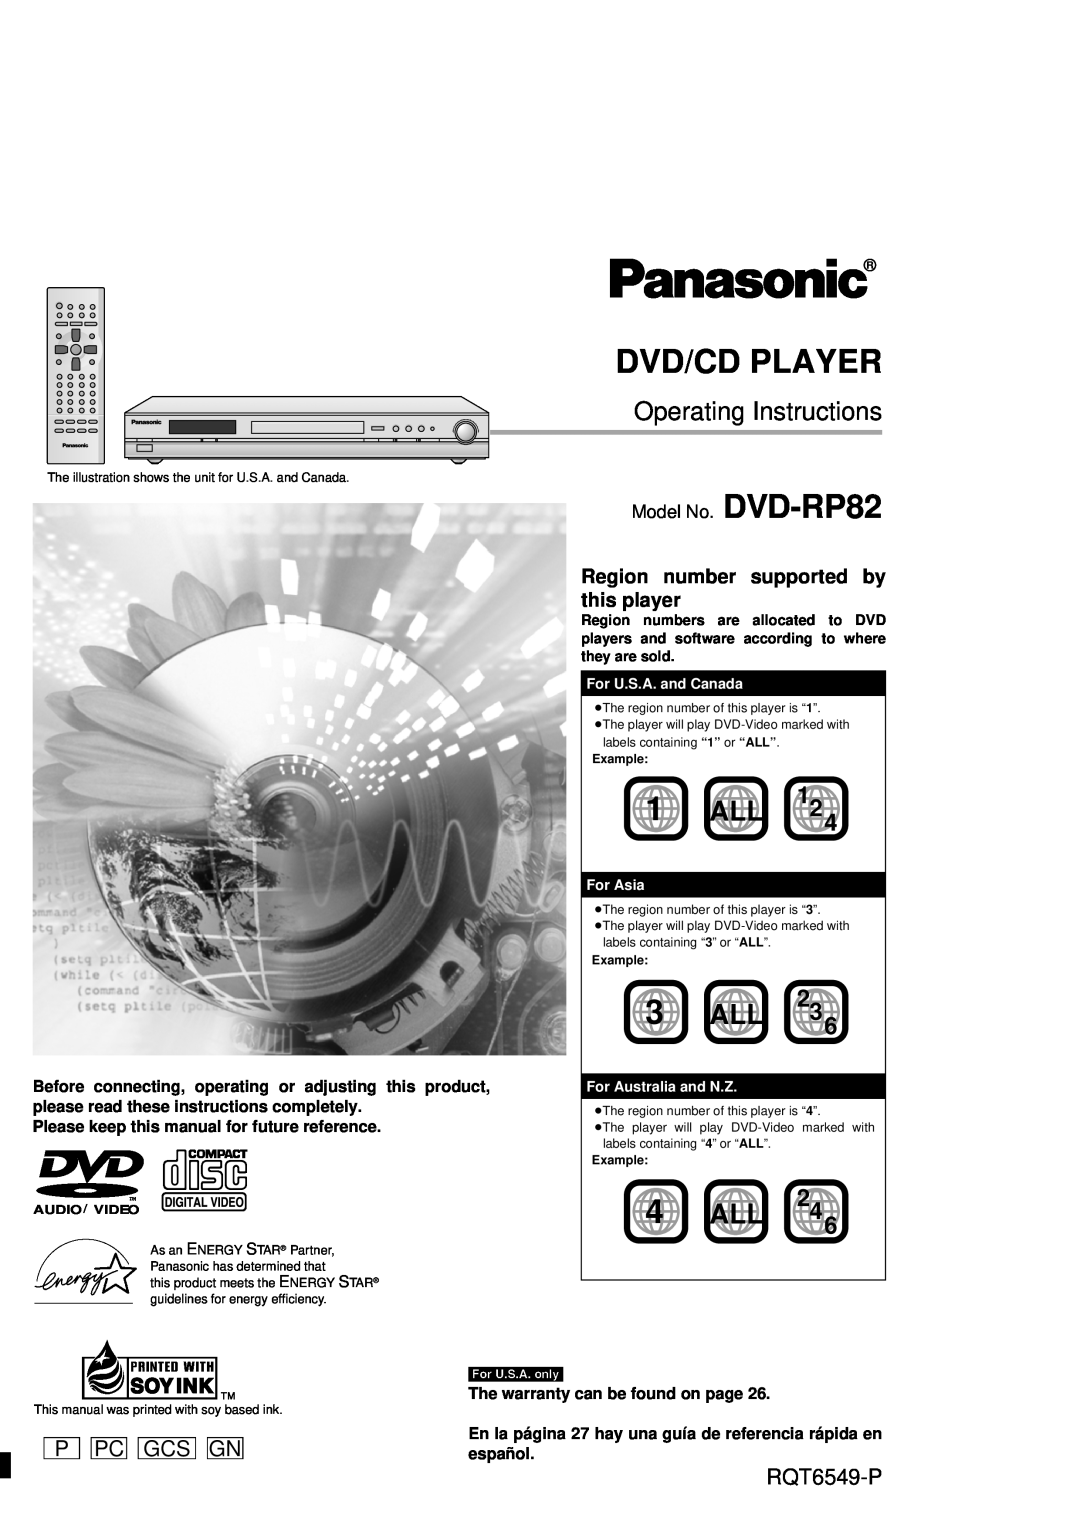 Panasonic DVD-RP82 warranty P Pc Gcs Gn, RQT6549-P, Dvd/Cd Player, 1 ALL, 3 ALL, 4 ALL, Operating Instructions, For Asia 